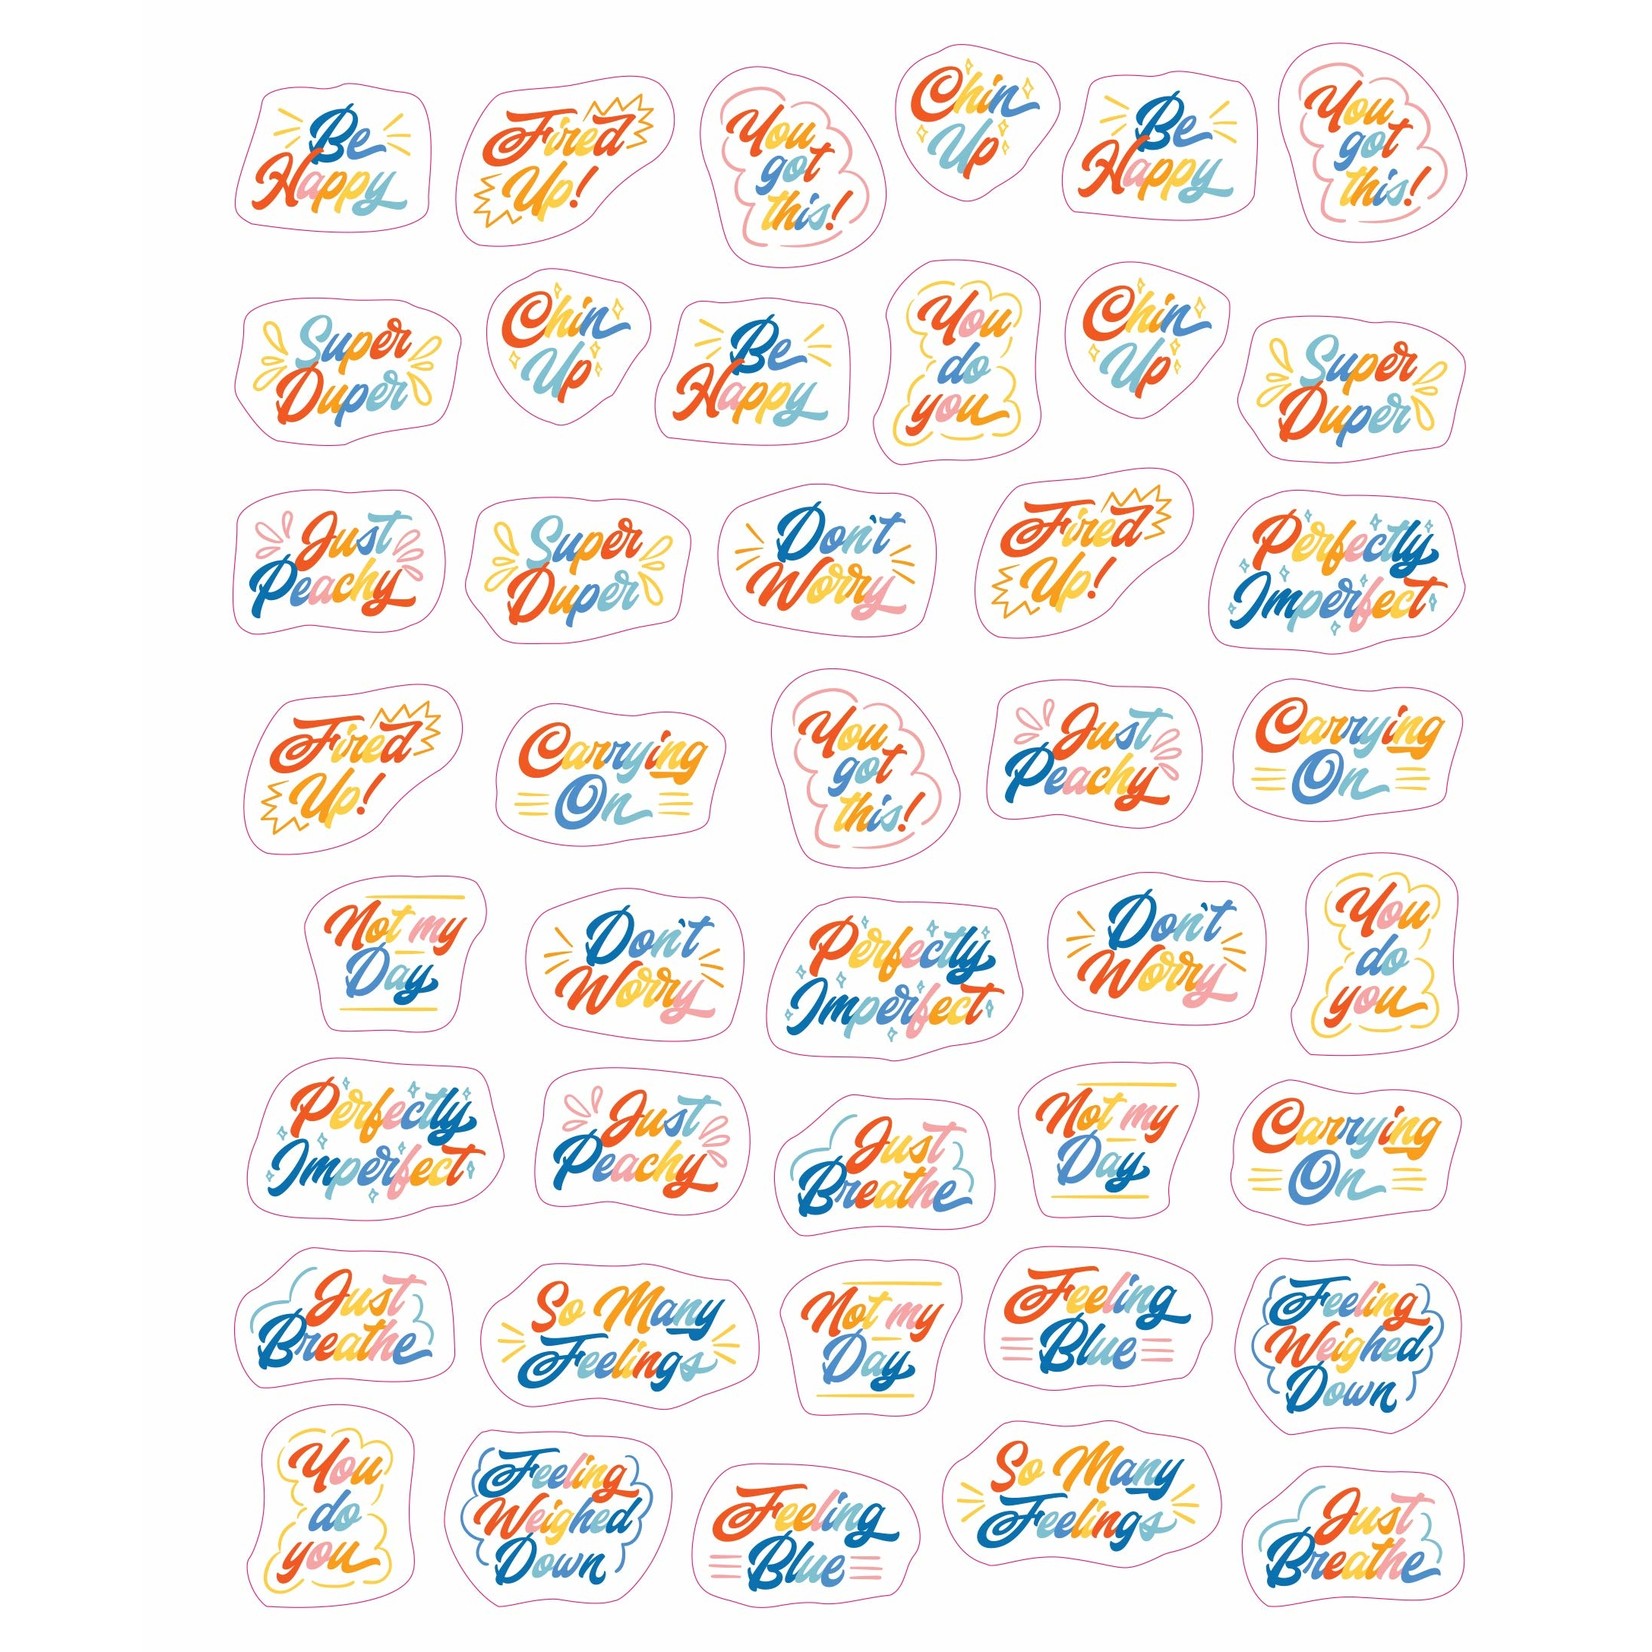 So. Many. Feelings Stickers.: 2,700 Stickers for Every Mood [Book]